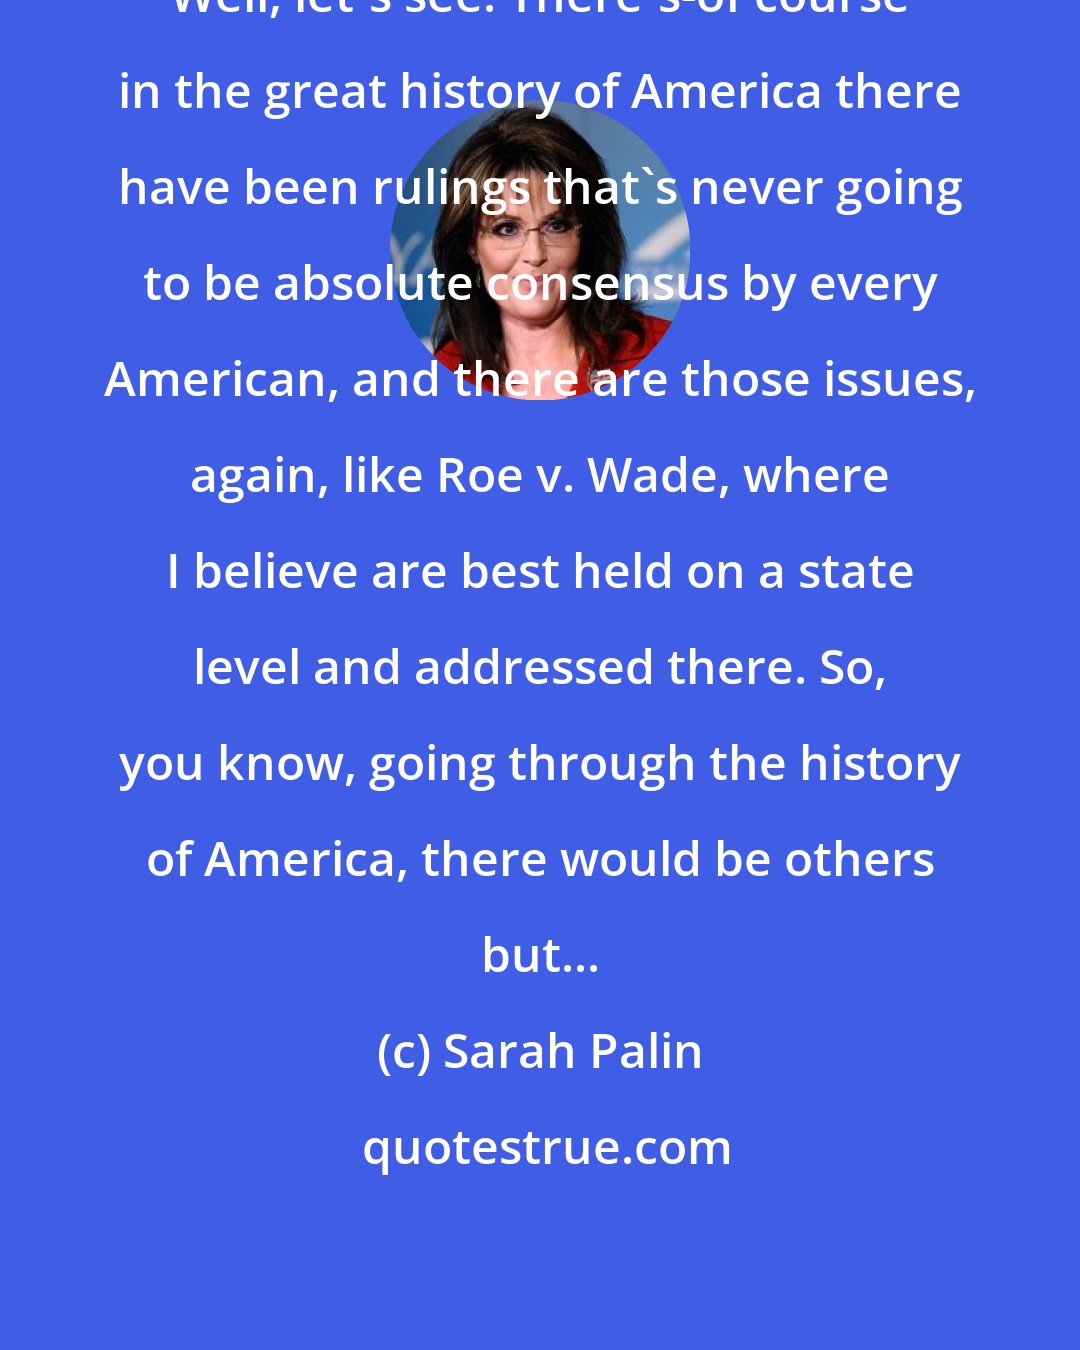 Sarah Palin: Well, let's see. There's-of course in the great history of America there have been rulings that's never going to be absolute consensus by every American, and there are those issues, again, like Roe v. Wade, where I believe are best held on a state level and addressed there. So, you know, going through the history of America, there would be others but...